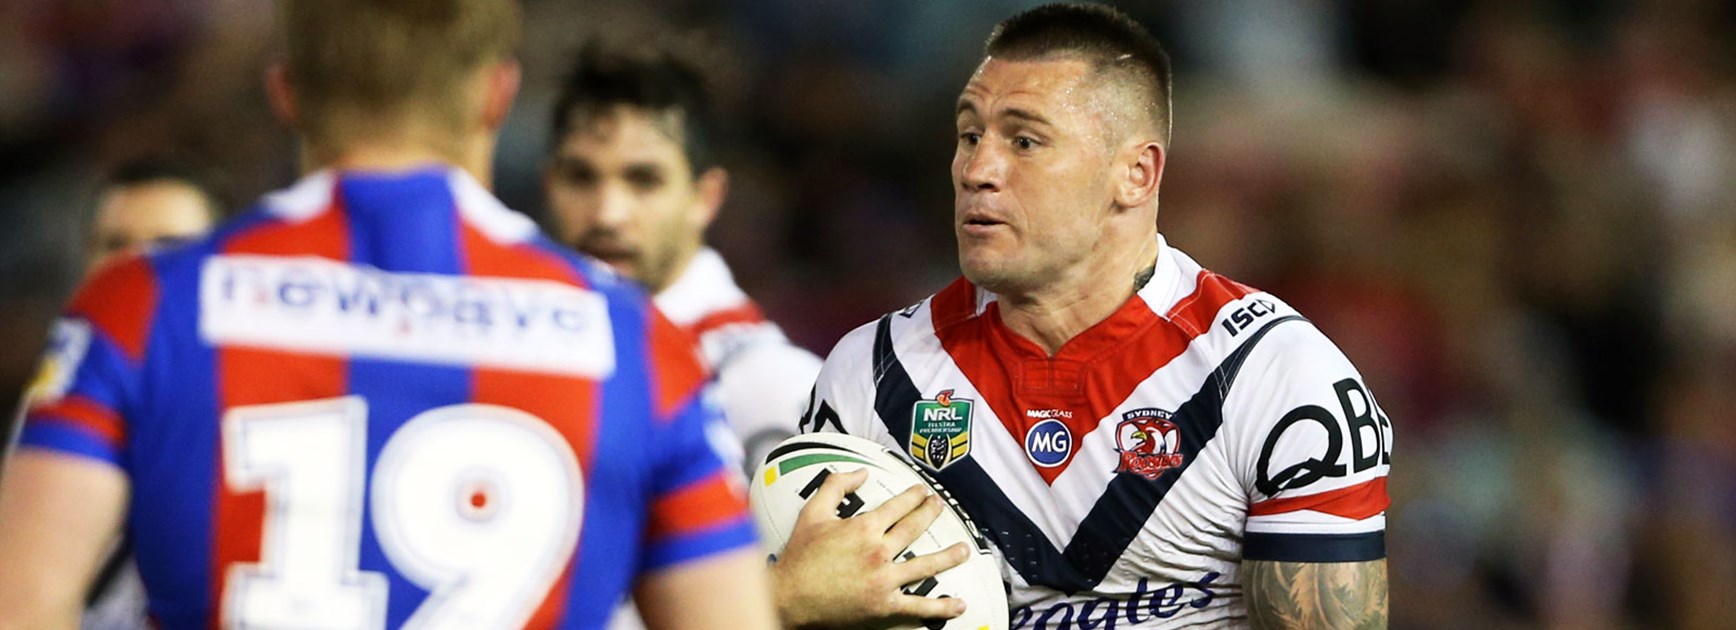 Roosters winger Shaun Kenny-Dowall against the Knights in Round 7.